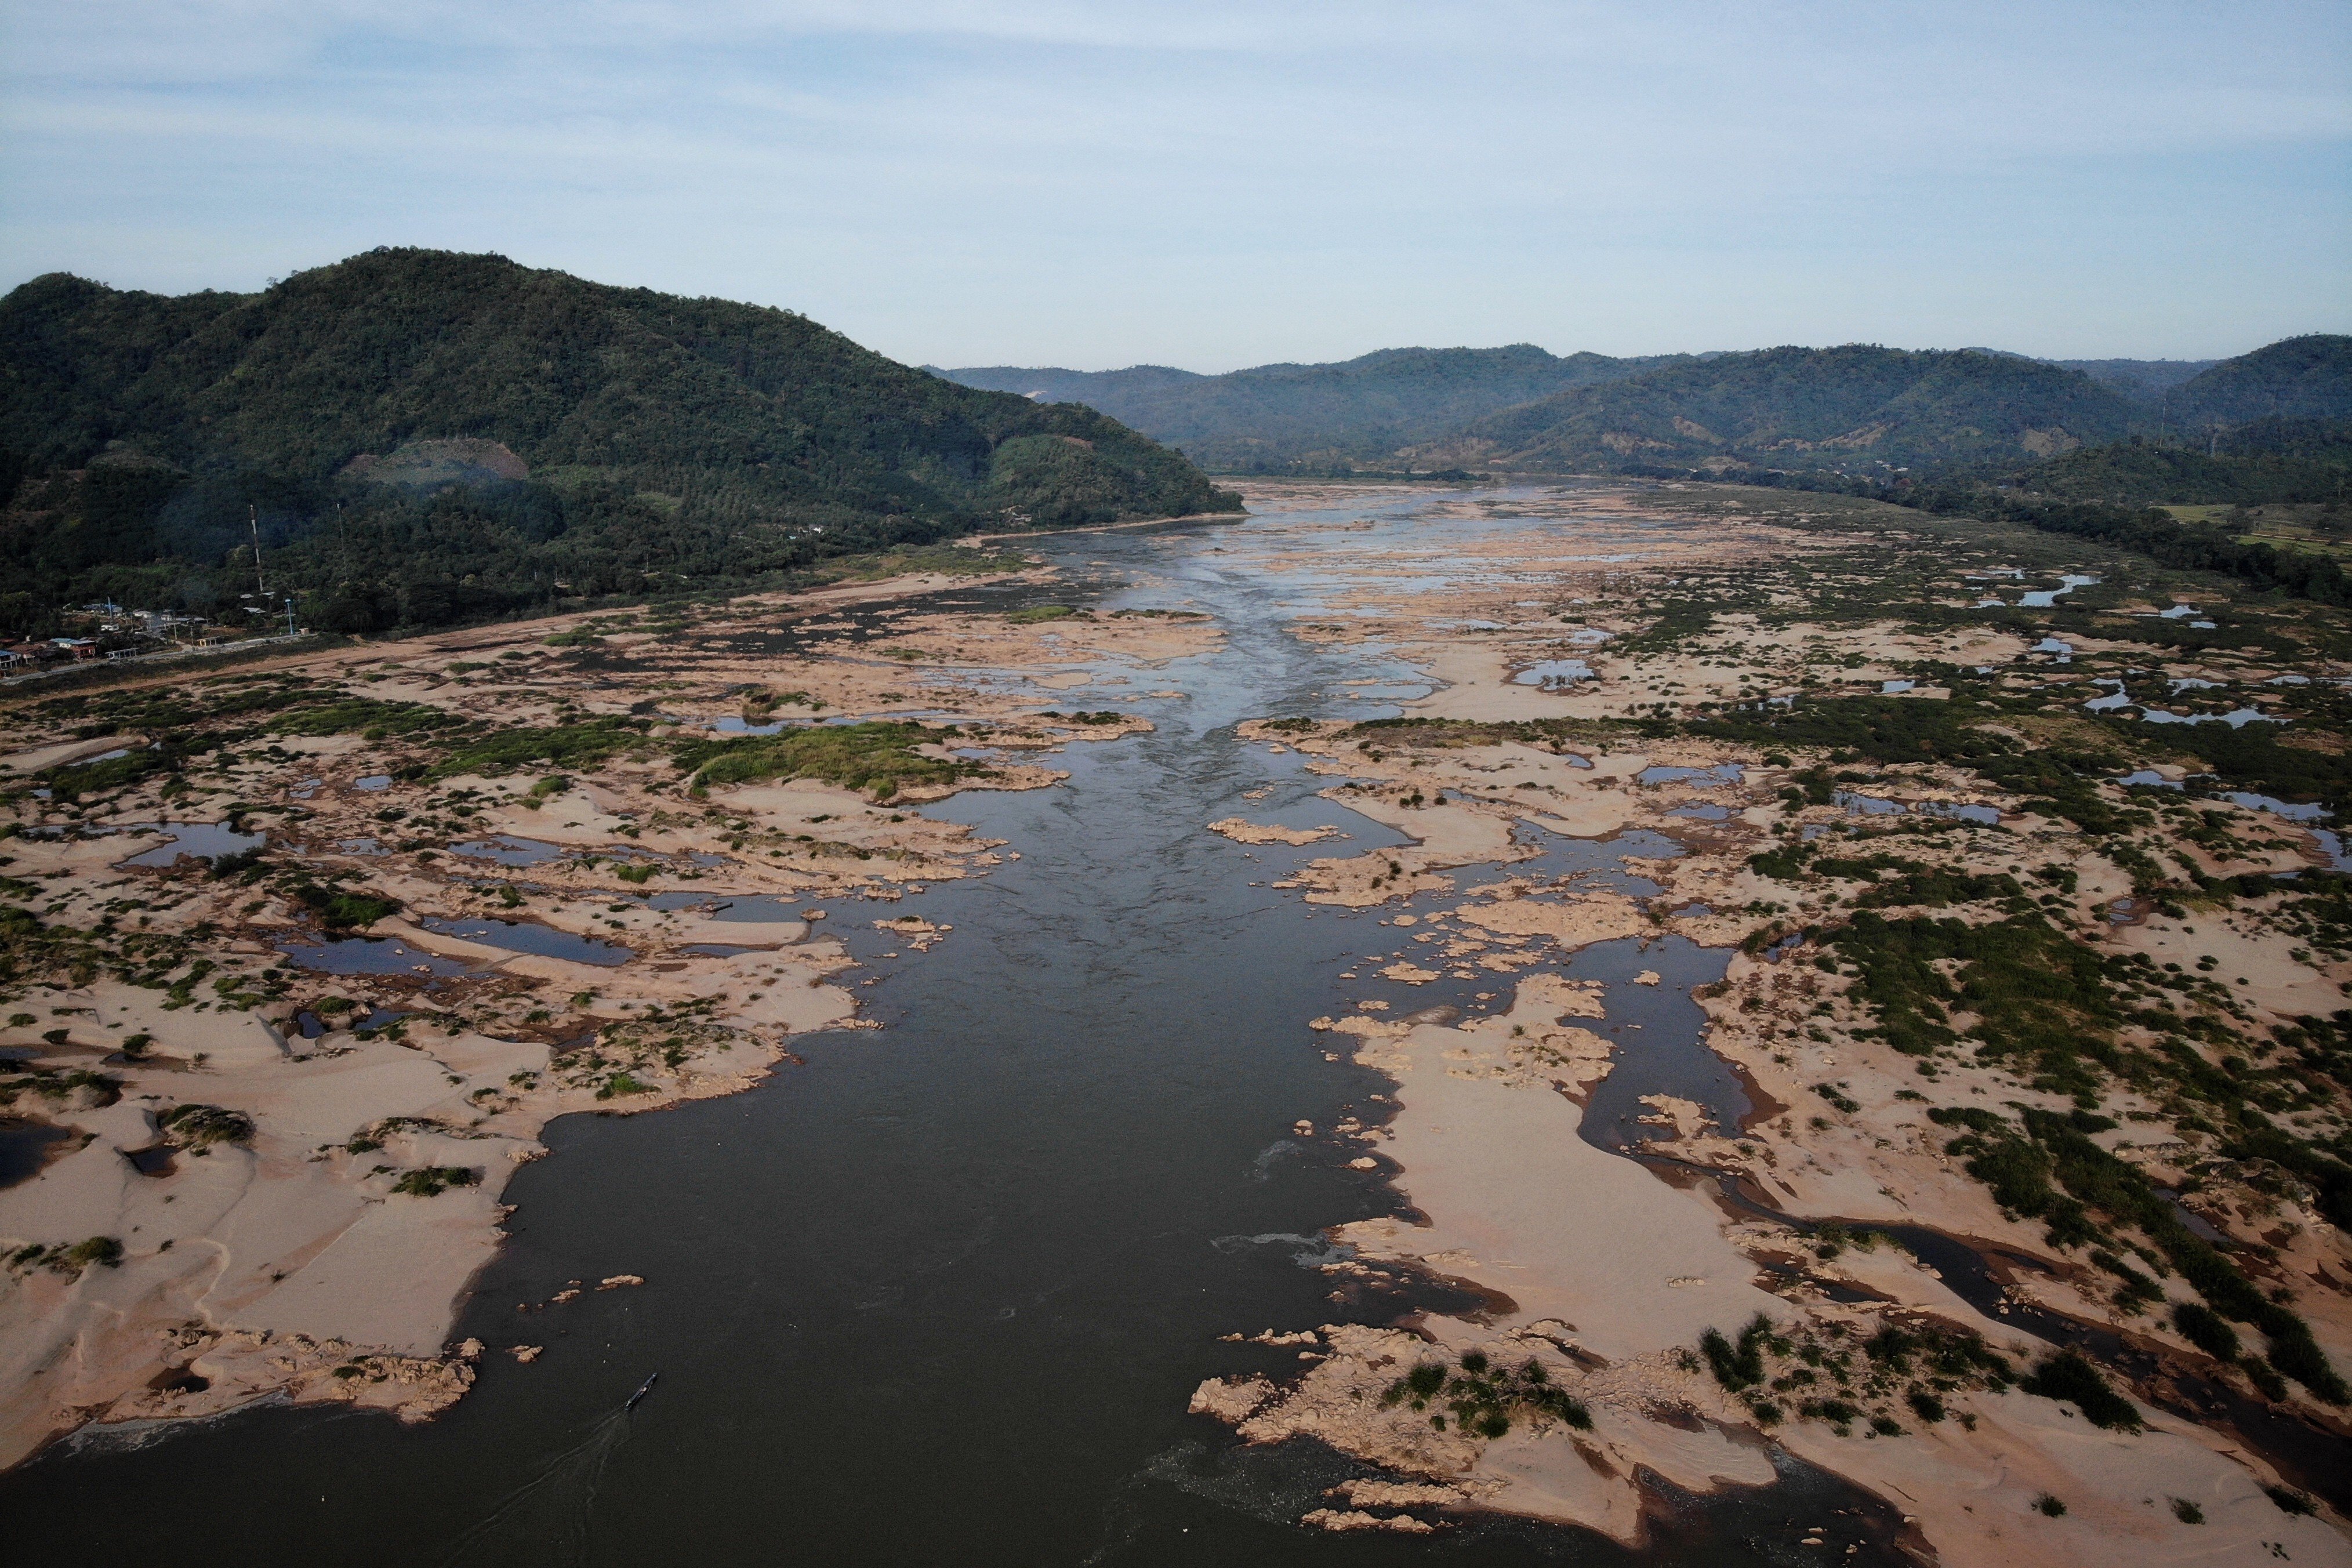 The Mekong River seen in northeastern Thailand in October 2019, after a summer of severe droughts. Photo: AFP